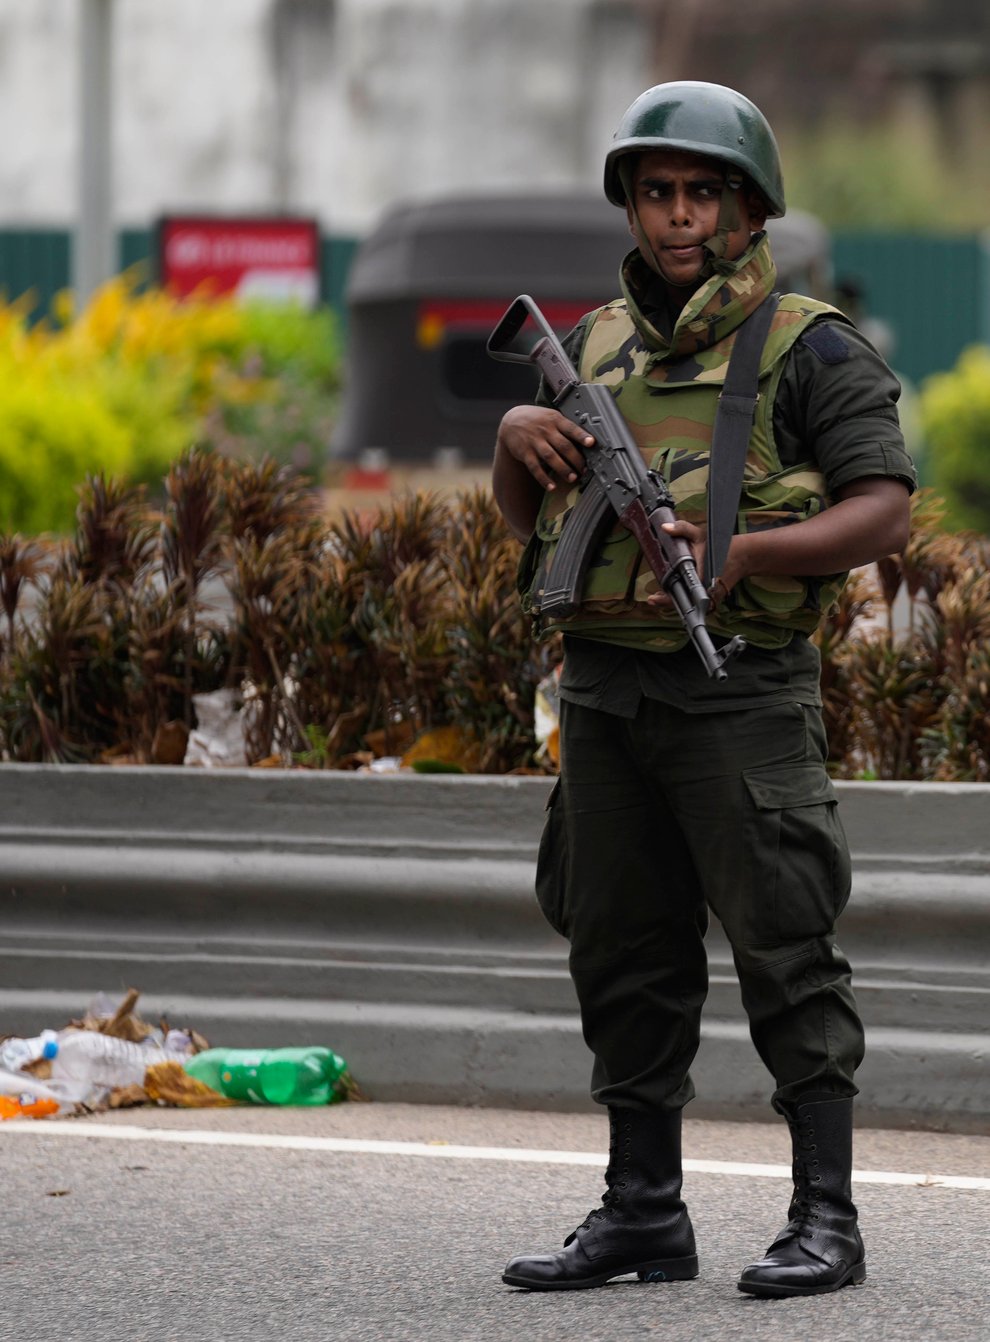 Sri Lankan troops stand guard outside the former prime minister’s residence a day after clashes between government supporters and anti-government protesters in Colombo (Eranga Jayawardena/AP)